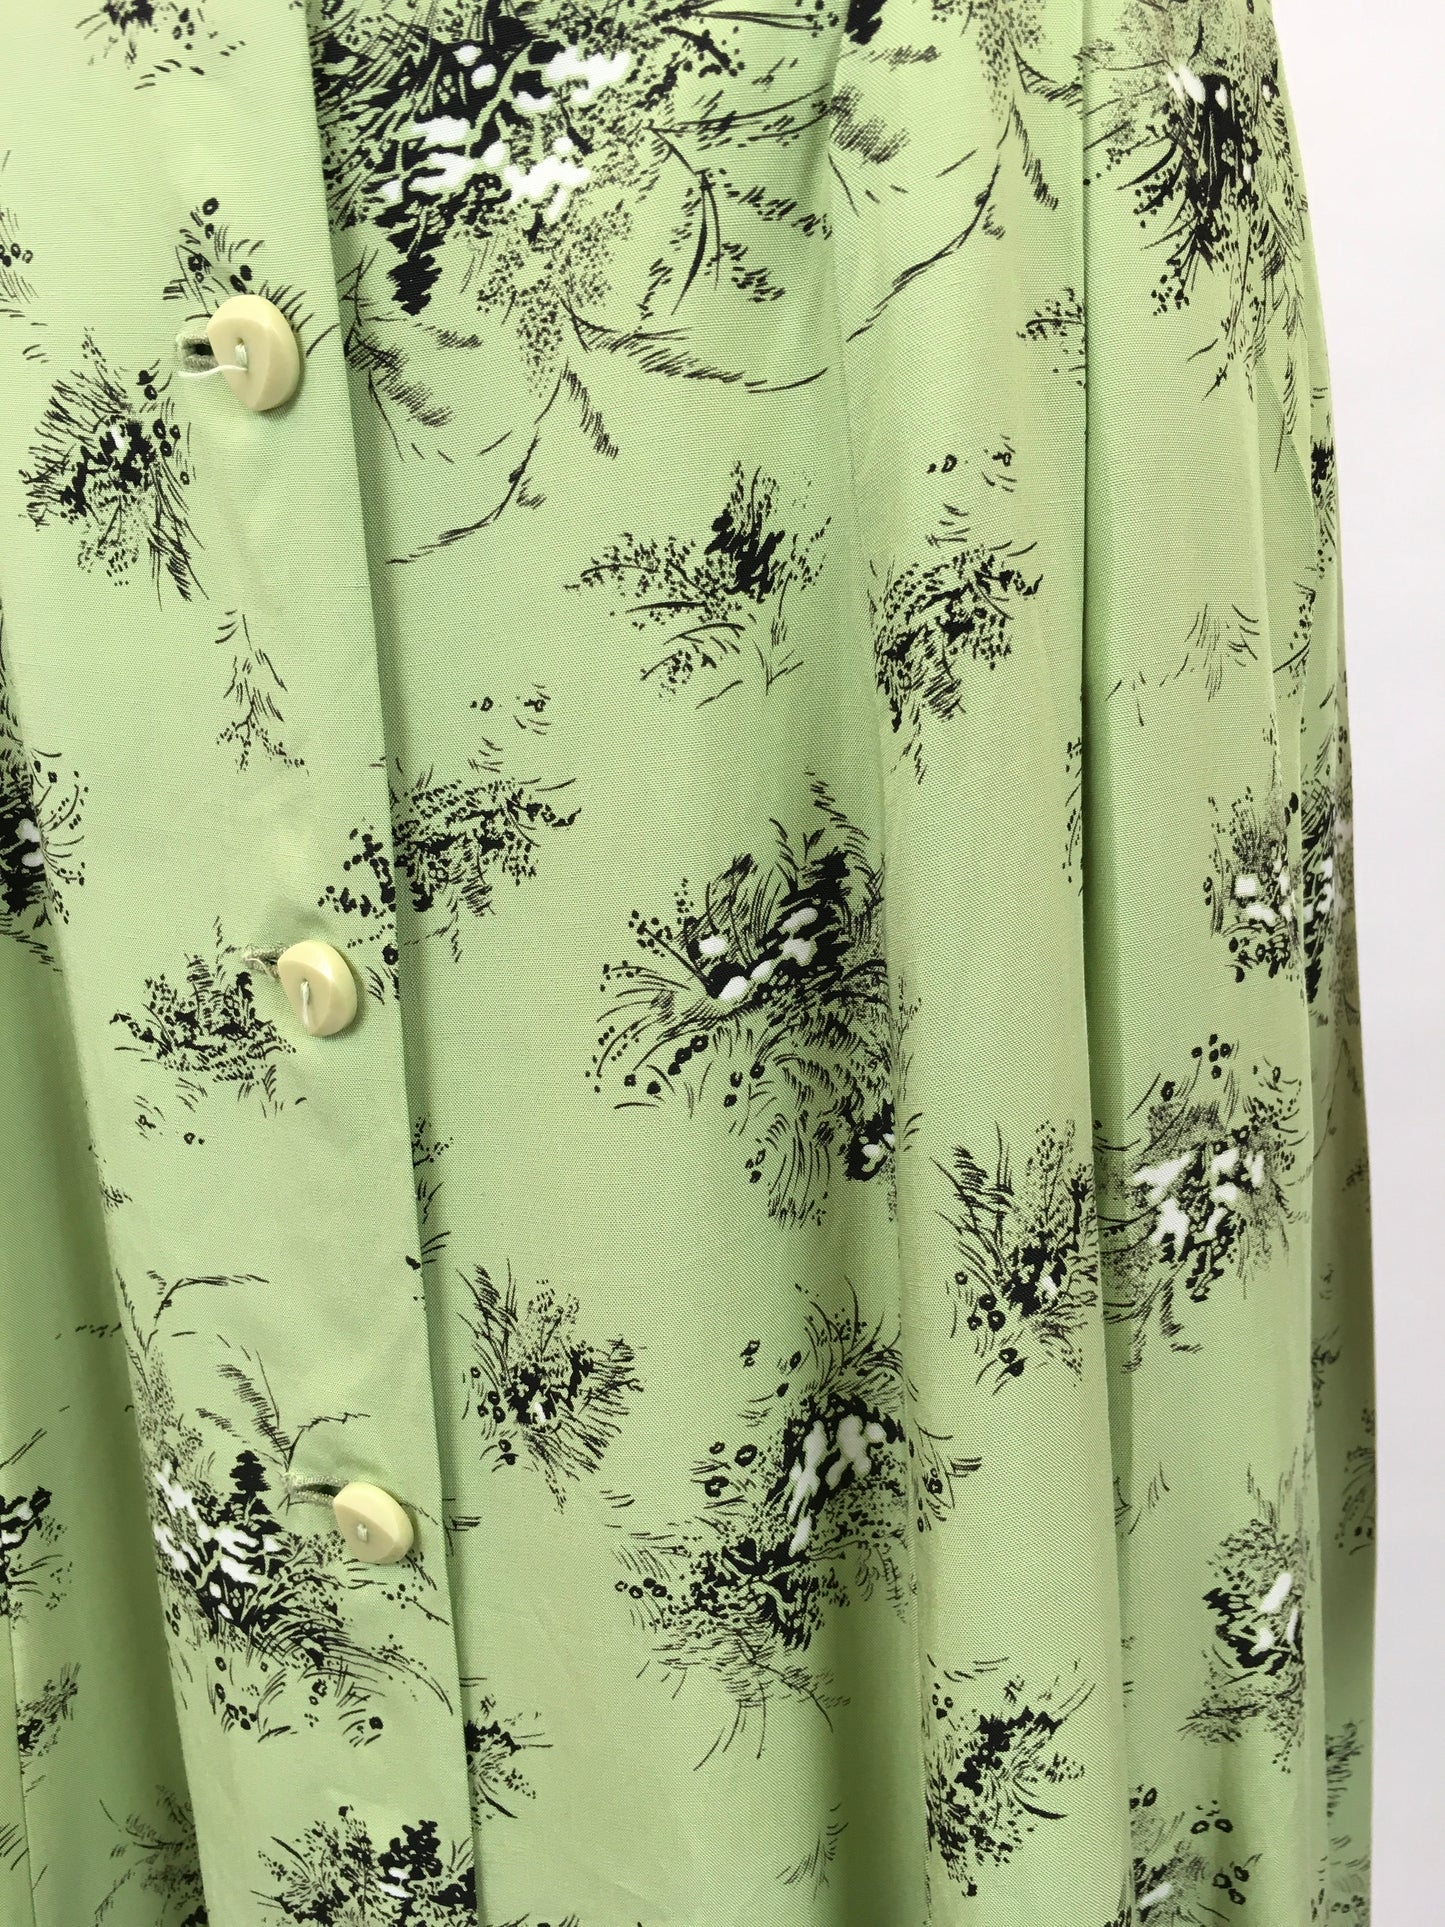 Original Late 1940’s ‘ St. Michael’ Cotton Day Dress - In a Beautiful Green and Black Stencilled Floral Print